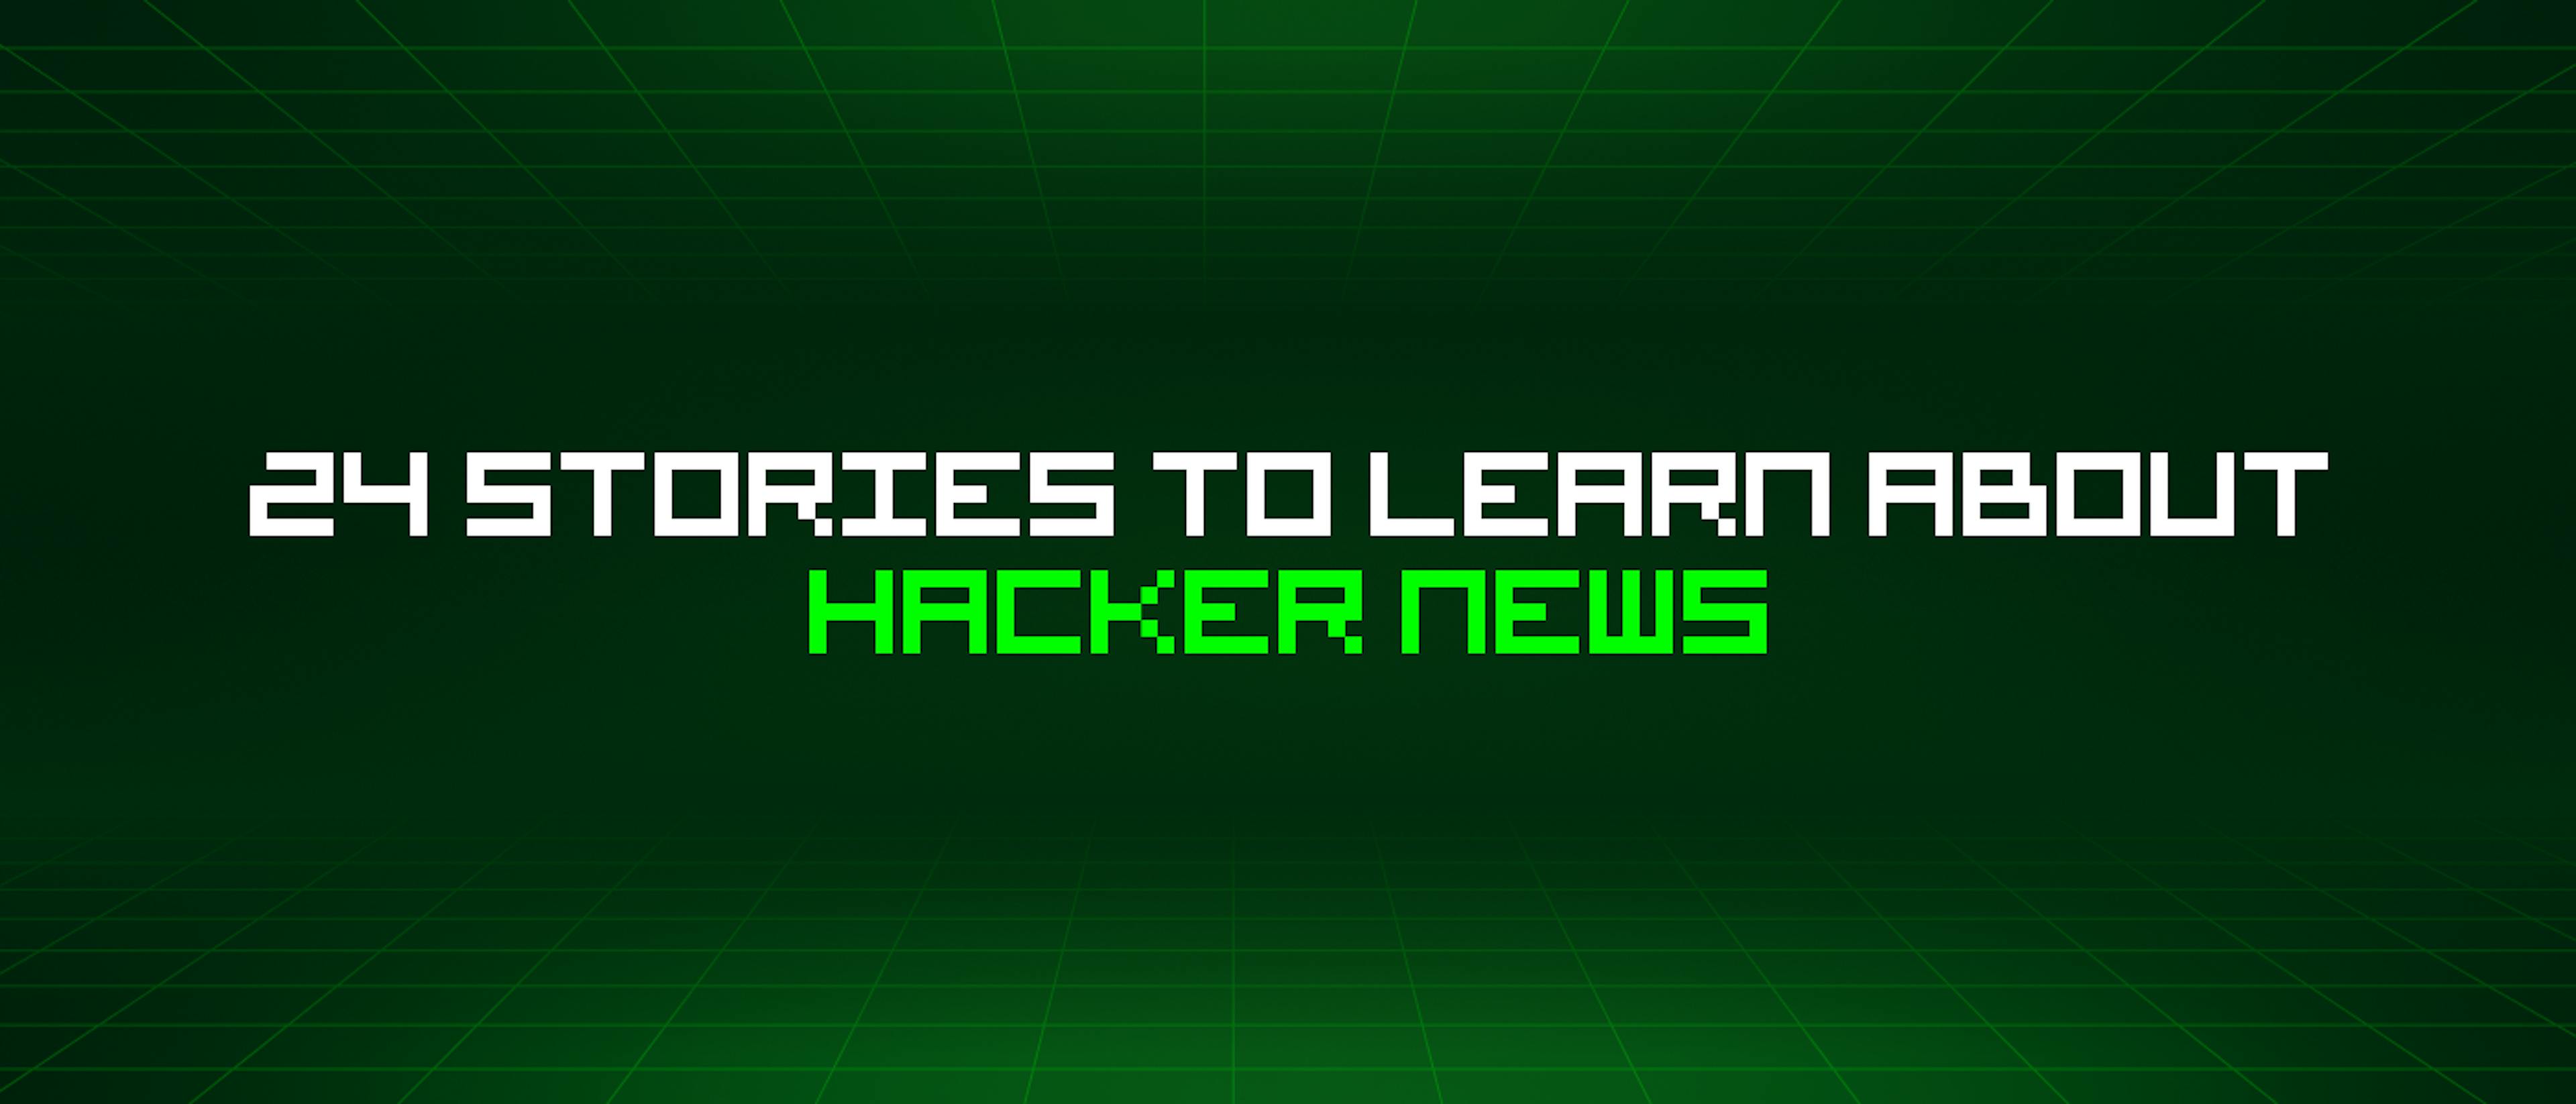 featured image - 24 Stories To Learn About Hacker News